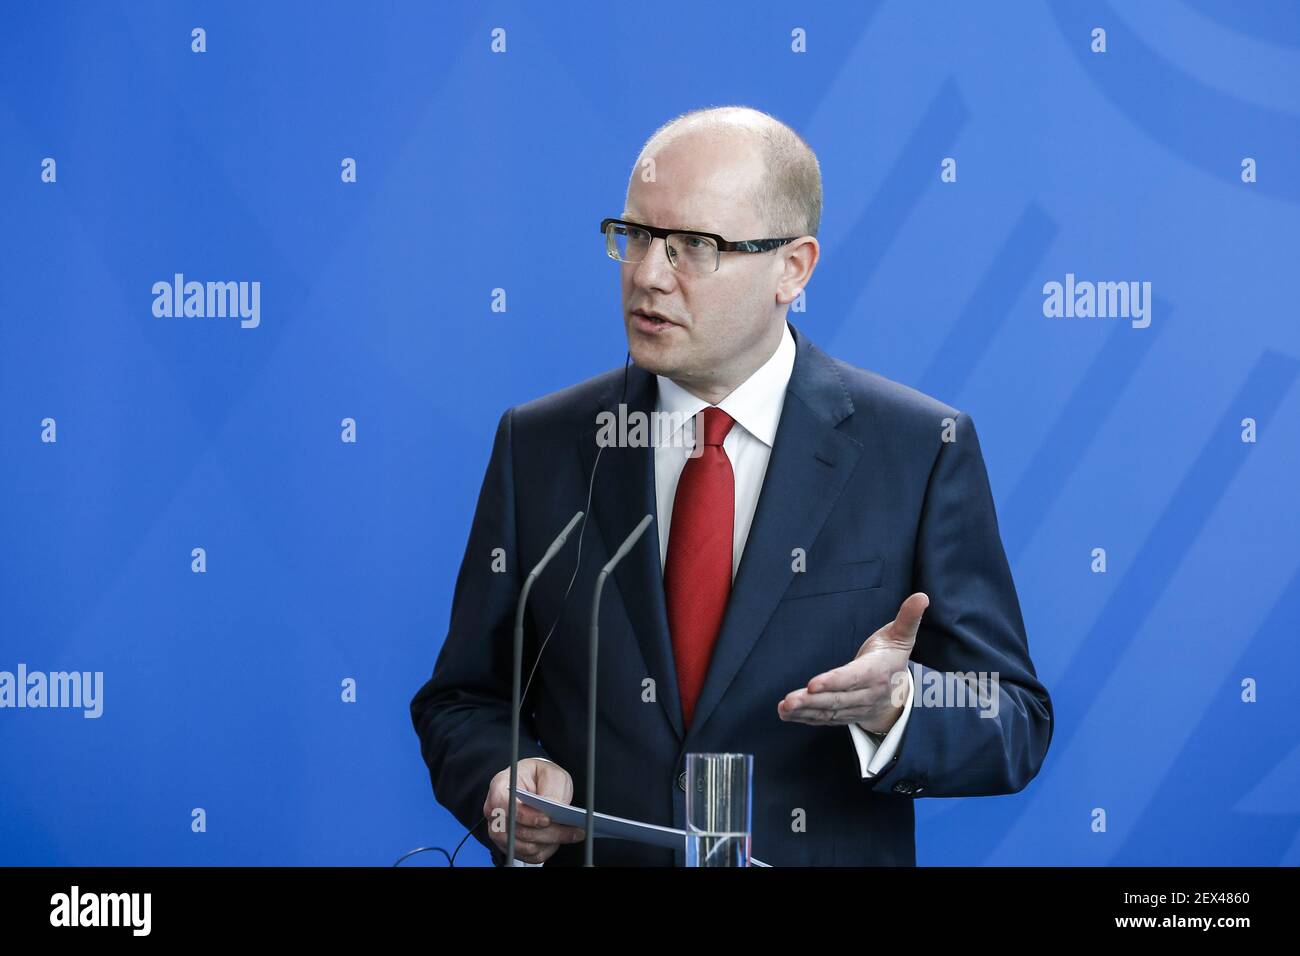 Czech prime minister Sobotka and the German Chancellor Angela Merkel during a joint press conference at the German Chancellery in Berlin, Germany on Mai 04, 2015. / Picture: Bohuslav Sobotka, Prime Minister of the Czech Republic, speaks aside Merkel during joint press conference in Berlin. (Photo by Rey Paganelli) *** Please Use Credit from Credit Field *** Stock Photo